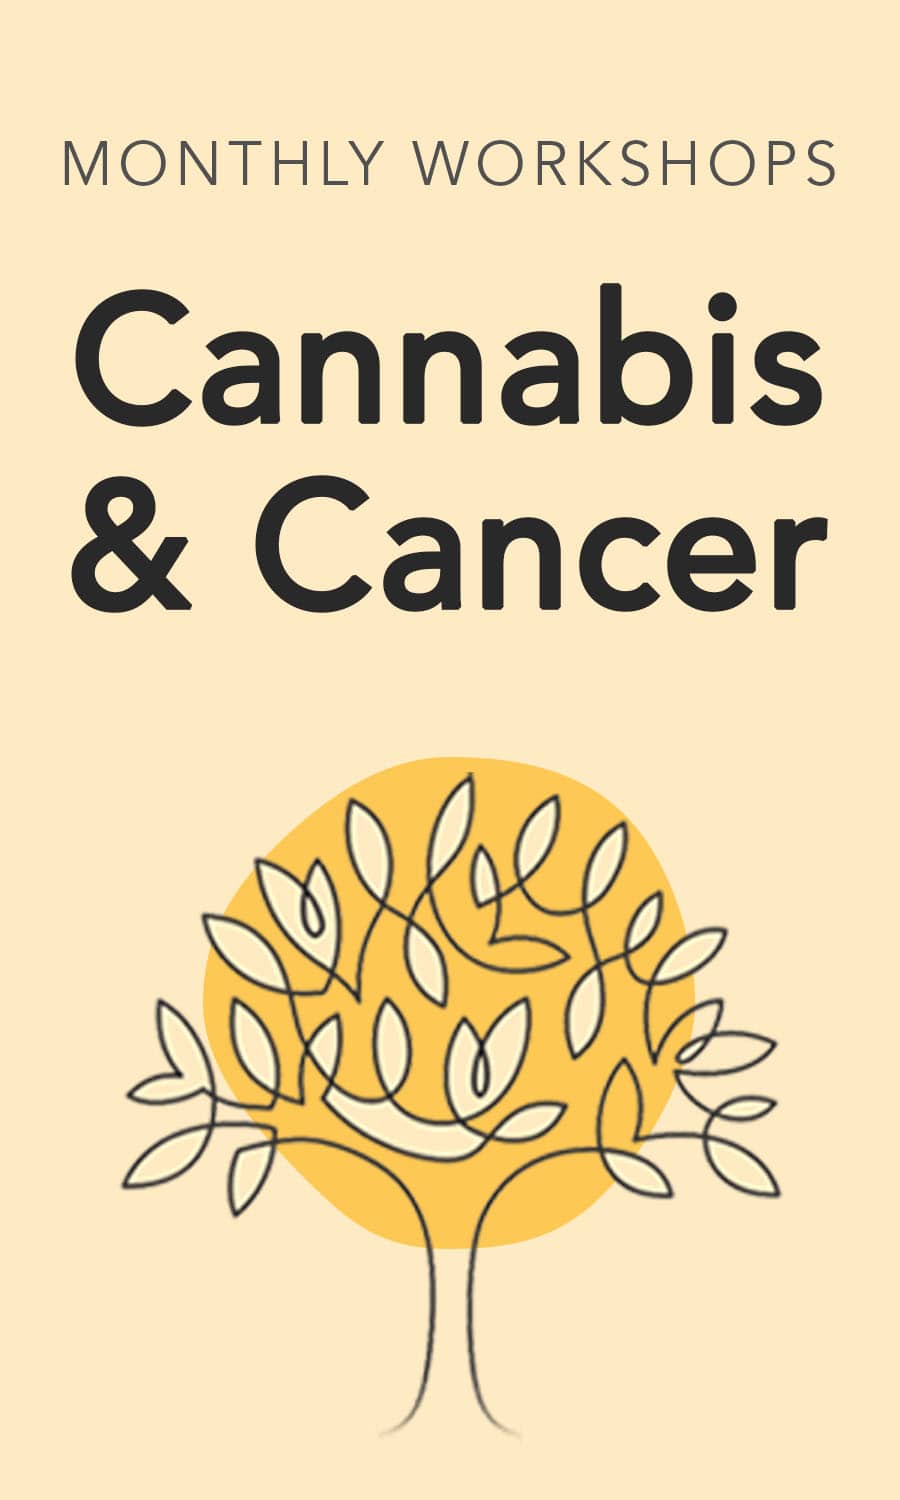 Cannabis & Cancer Monthly Workshops